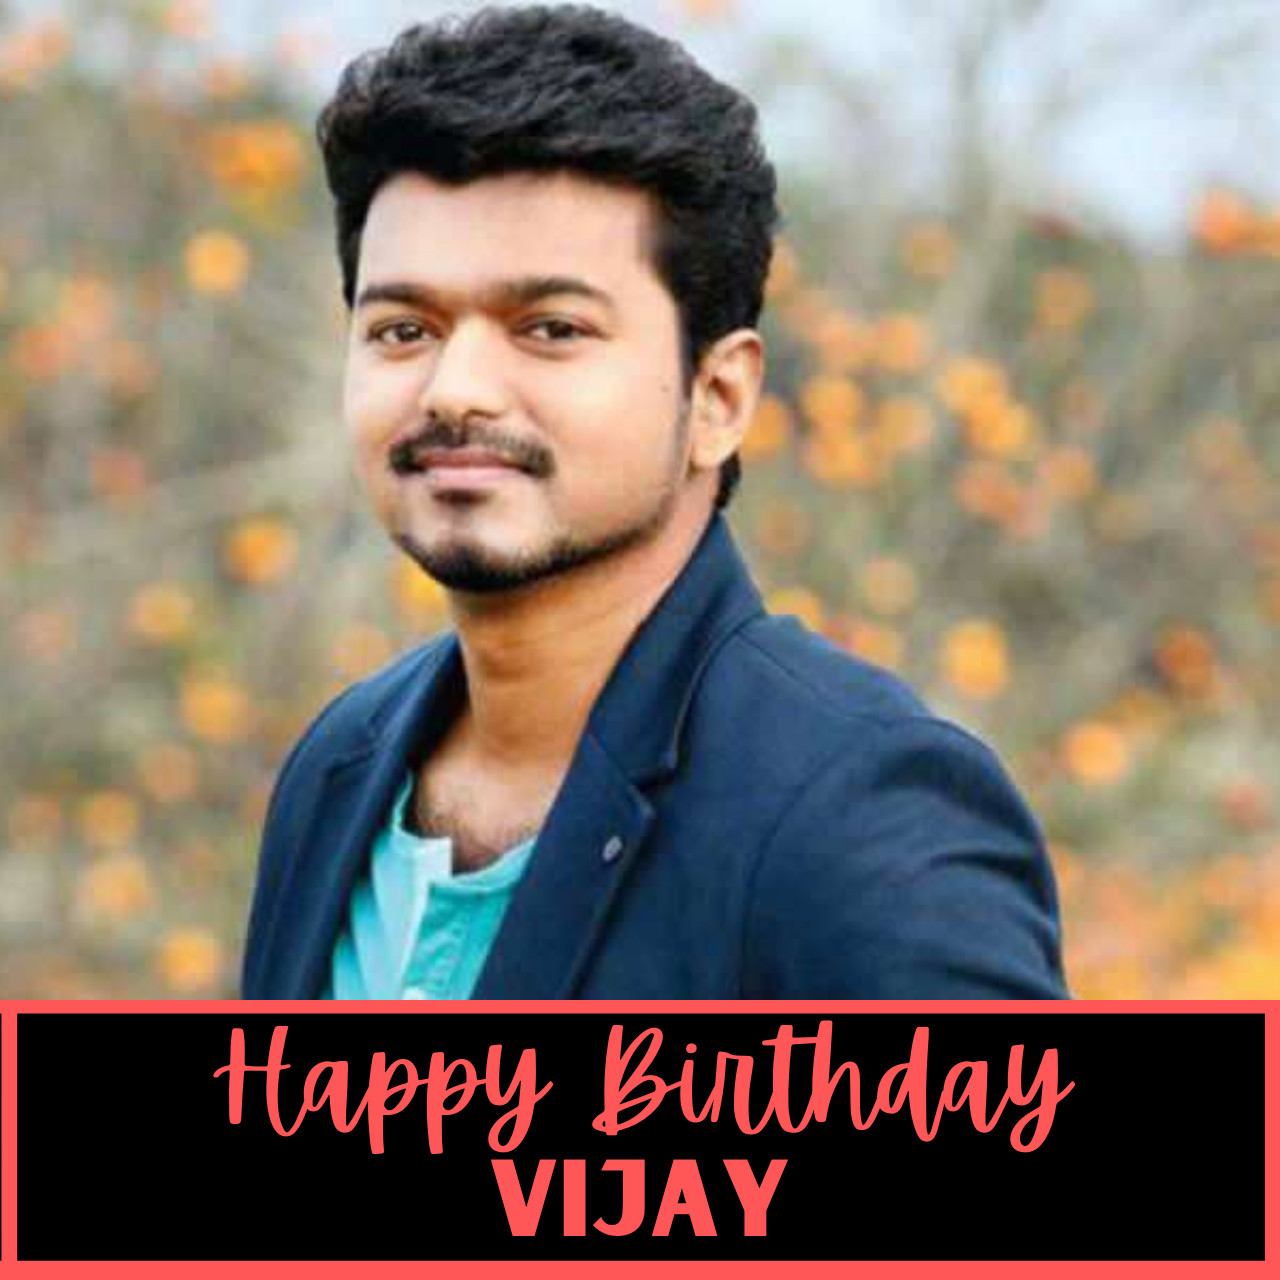 Happy Birthday Vijay Thalapathy Twitter Wishes, Photos (Images), Poster, Banner, and WhatsApp Status Video to greet south Superstar